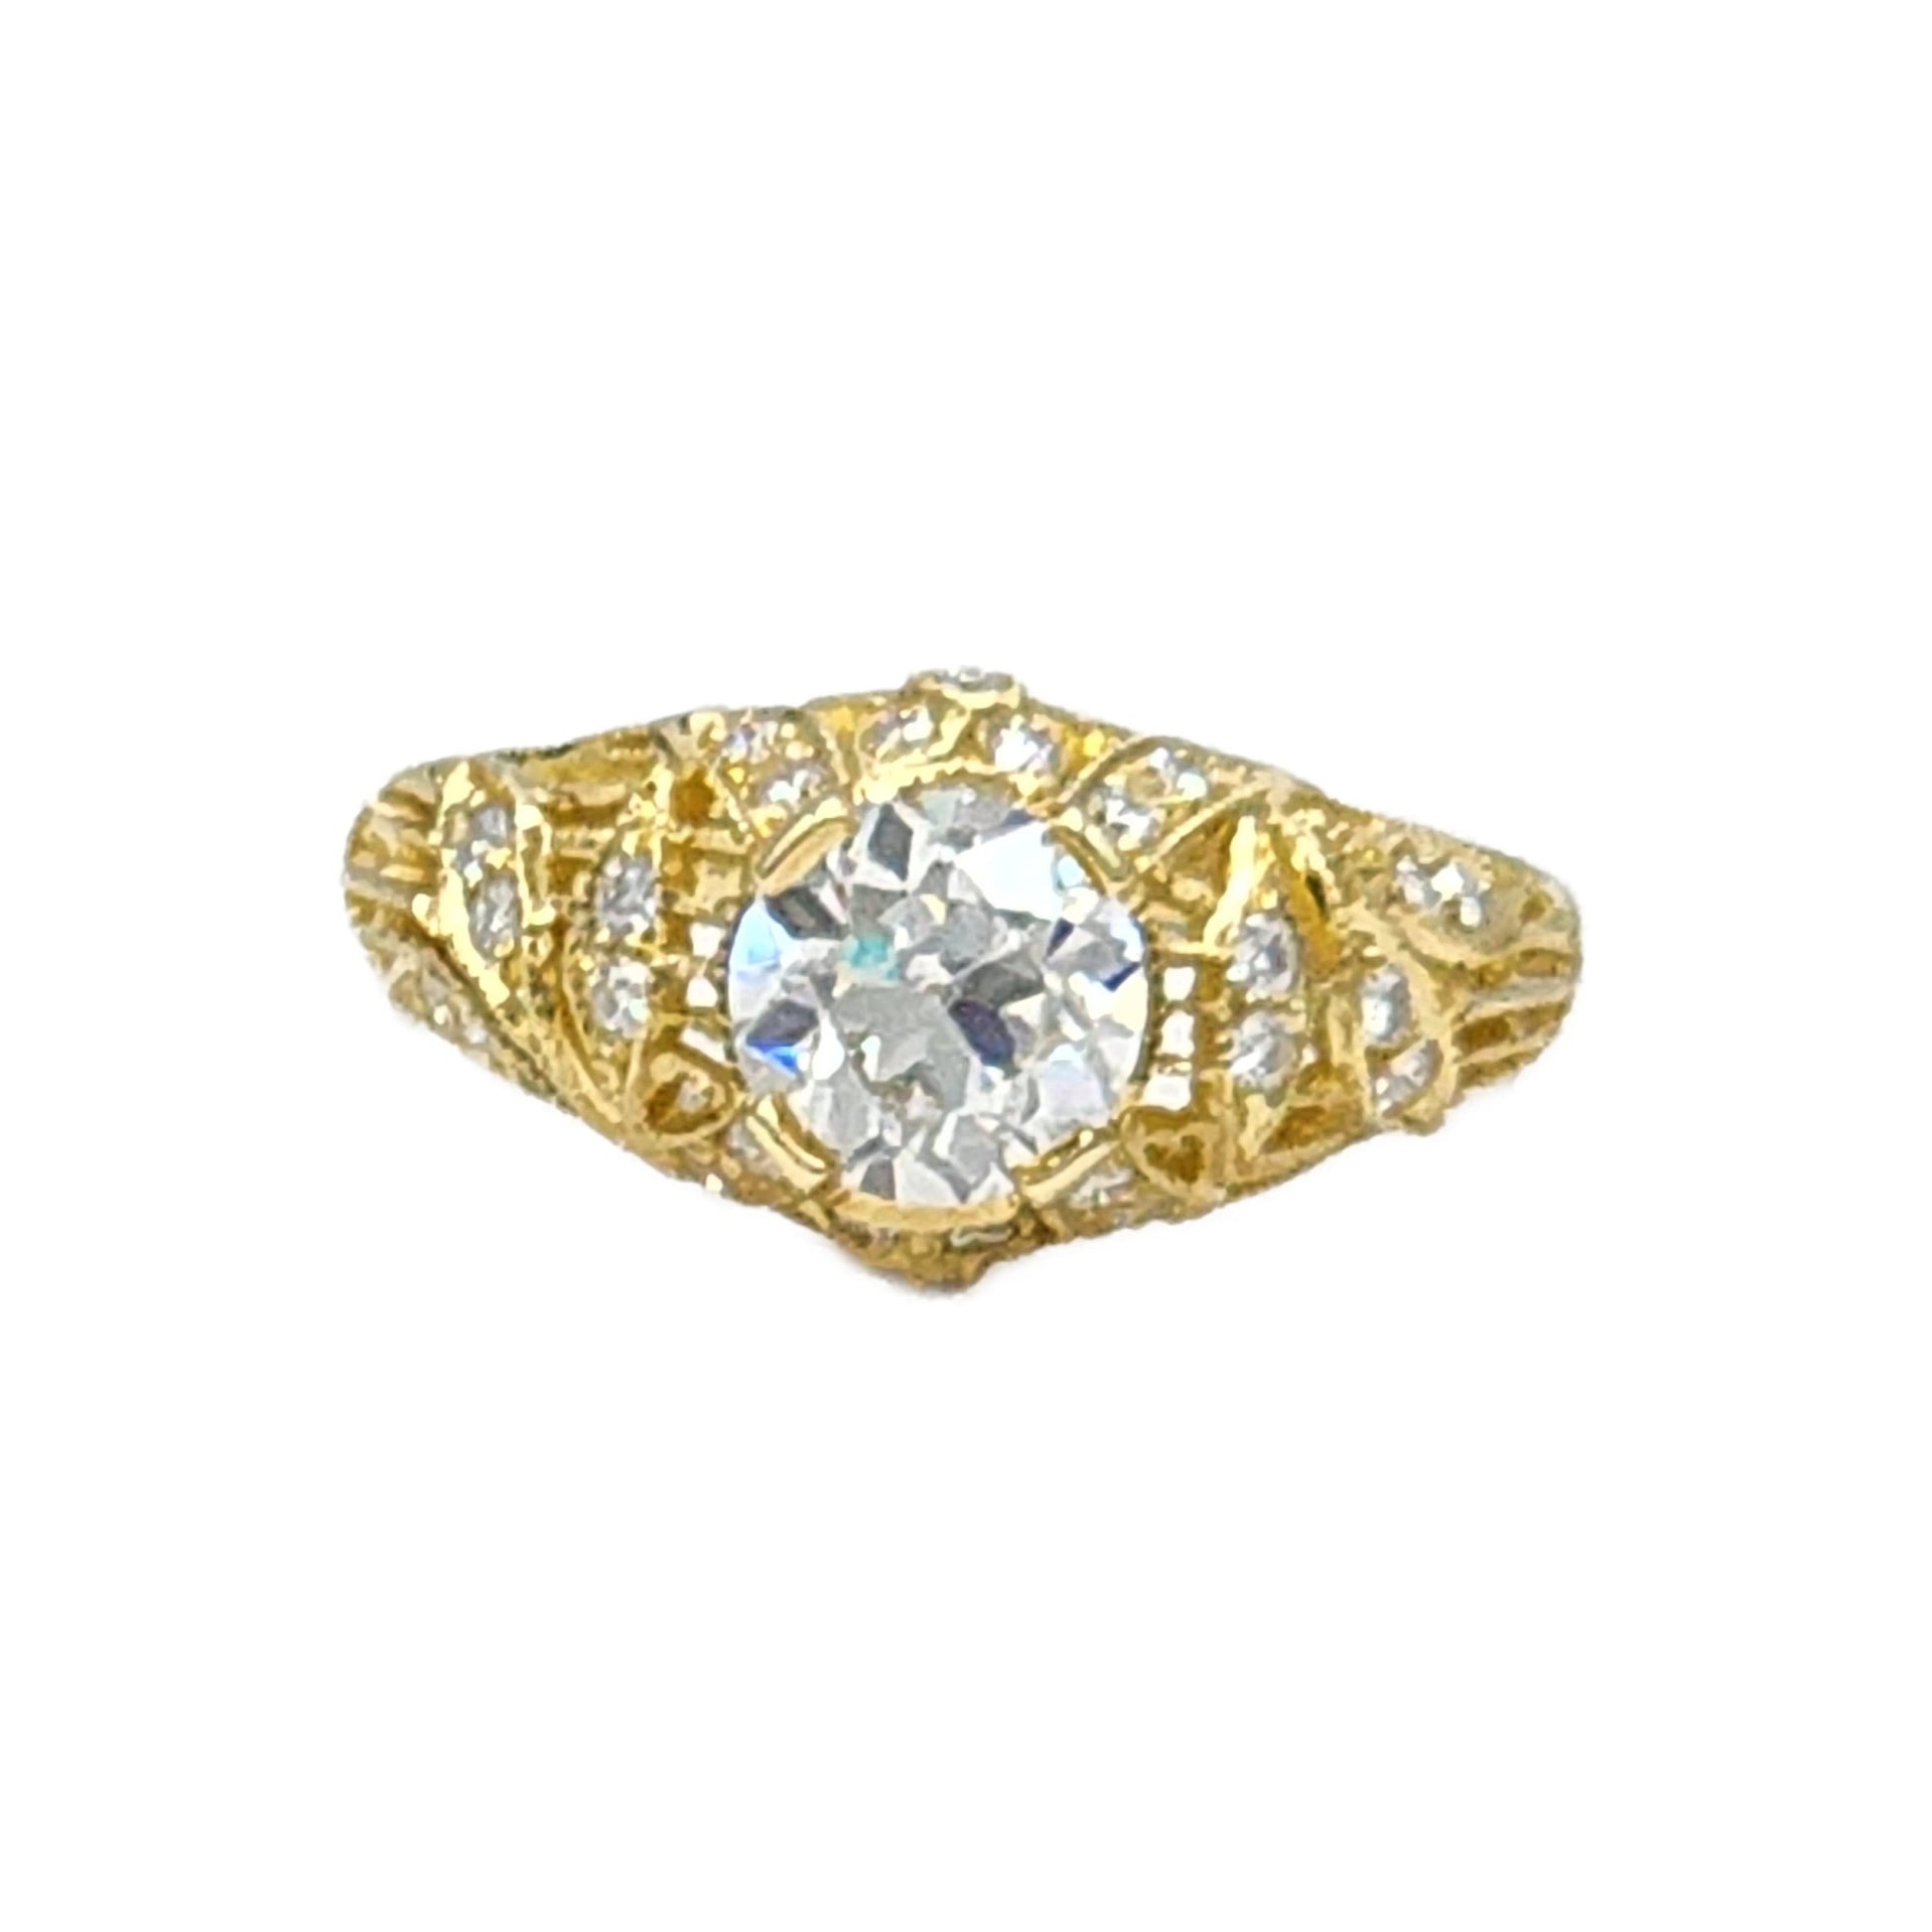 18K Yellow Gold 1.20 Carat European Cut Diamond Ring by Whitehouse Brothers